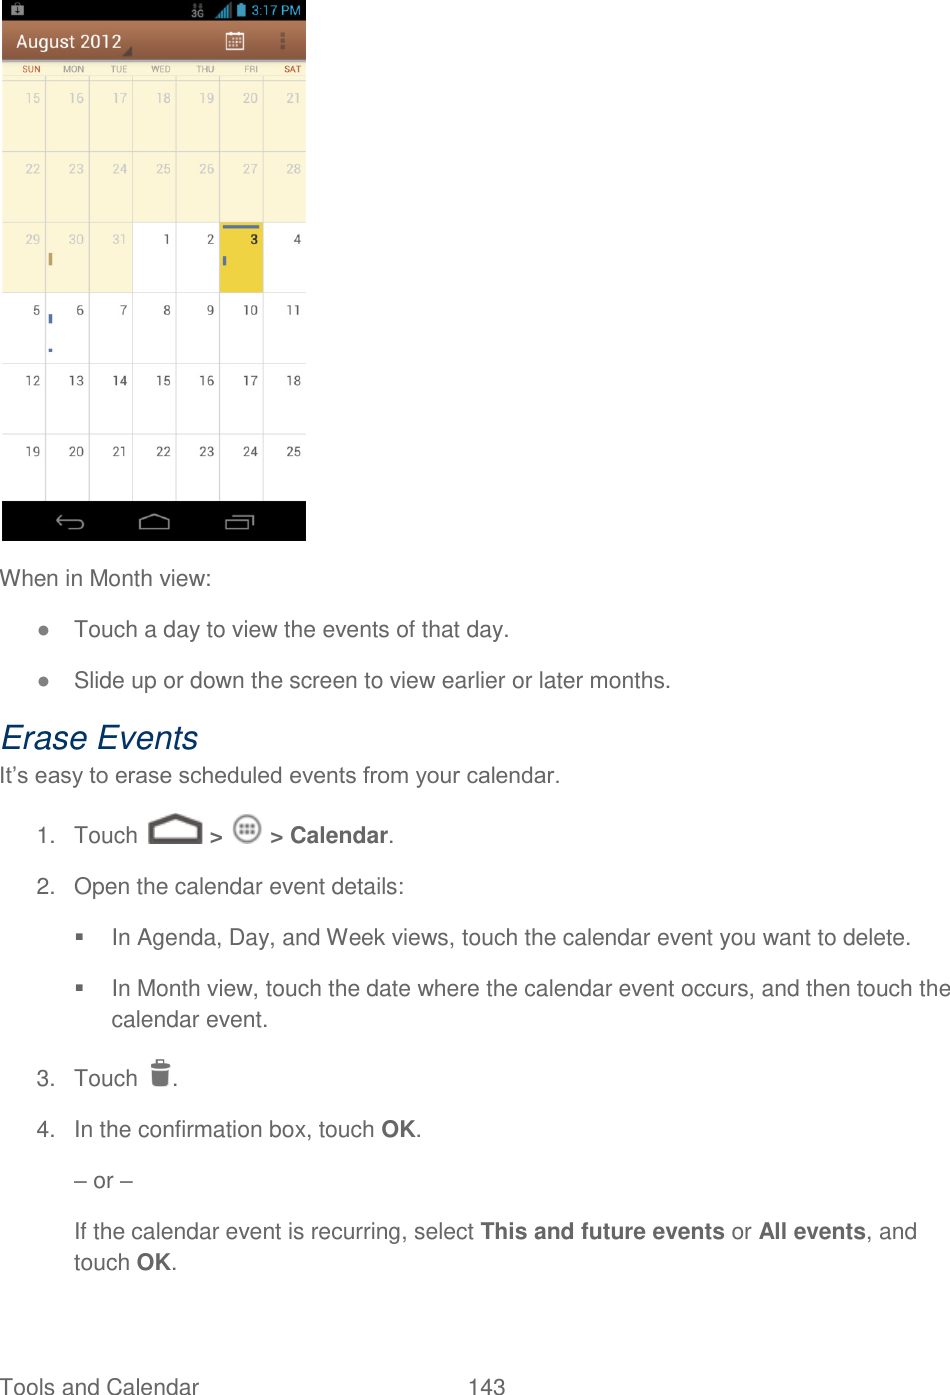 Tools and Calendar  143    When in Month view: ● Touch a day to view the events of that day. ● Slide up or down the screen to view earlier or later months. Erase Events It’s easy to erase scheduled events from your calendar. 1.  Touch   &gt;   &gt; Calendar. 2.  Open the calendar event details:   In Agenda, Day, and Week views, touch the calendar event you want to delete.   In Month view, touch the date where the calendar event occurs, and then touch the calendar event. 3.  Touch  .  4.  In the confirmation box, touch OK. – or – If the calendar event is recurring, select This and future events or All events, and touch OK. 